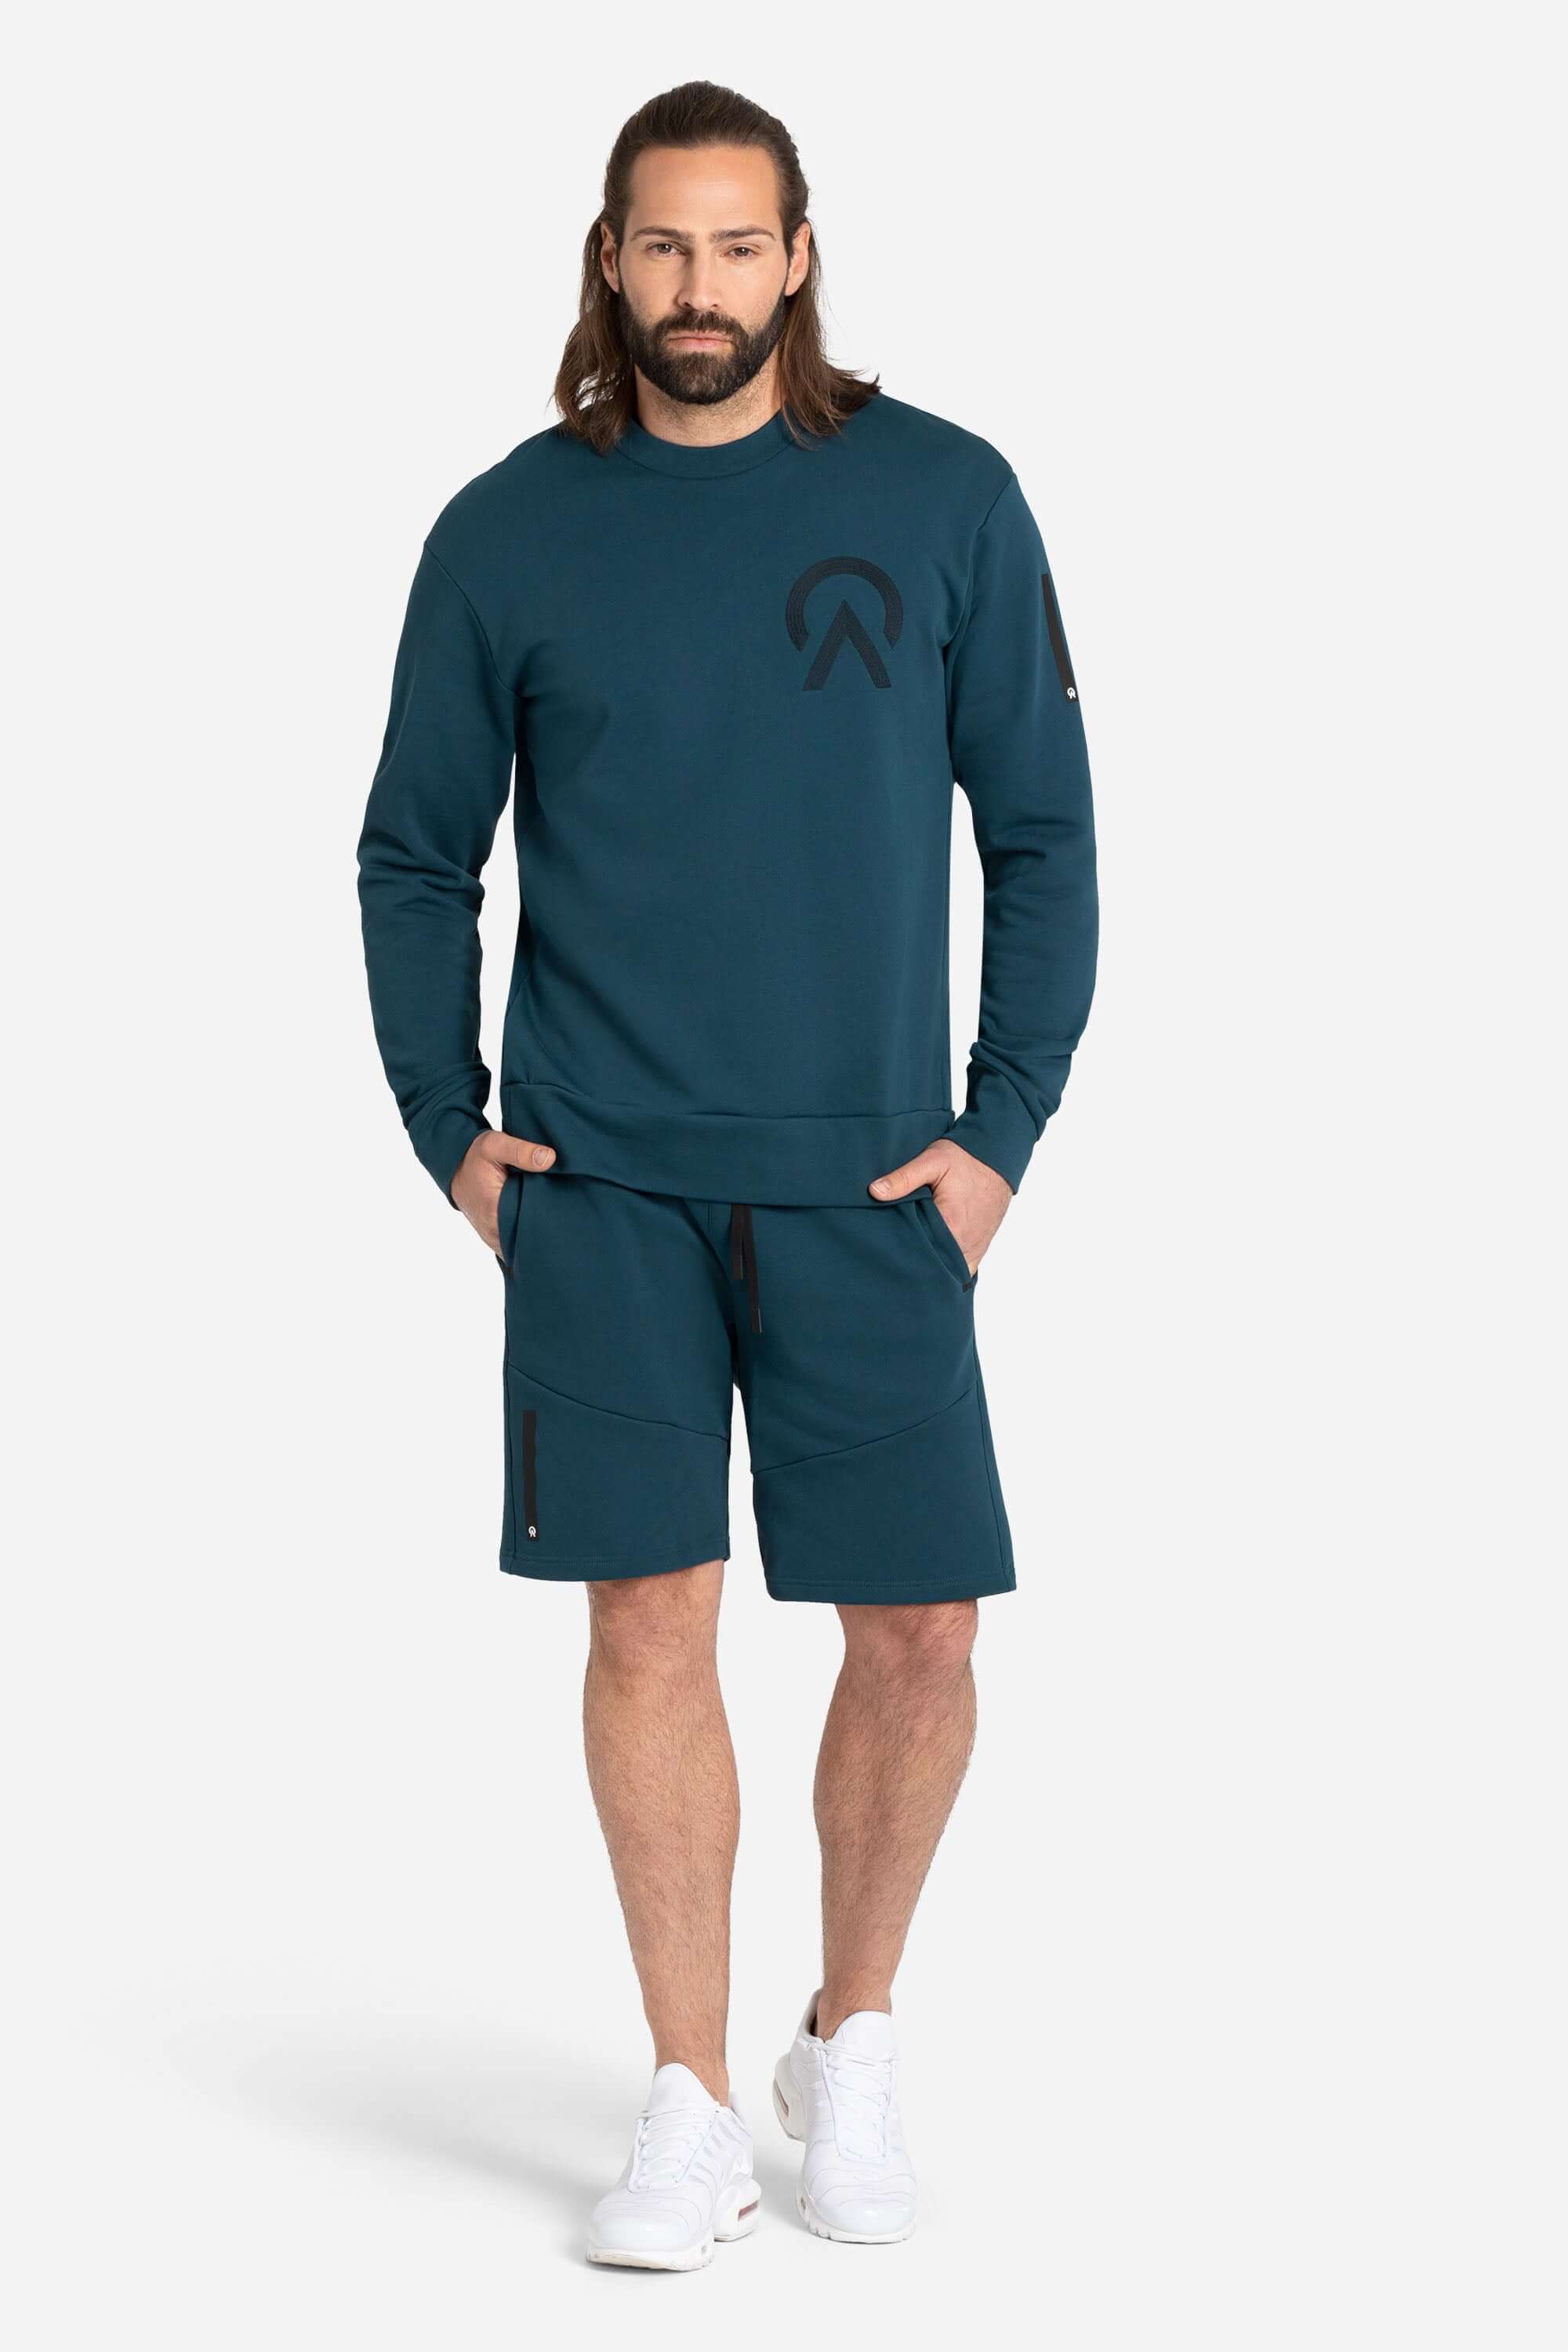 Men with a blue AYCANE crewneck pullover and blue shorts